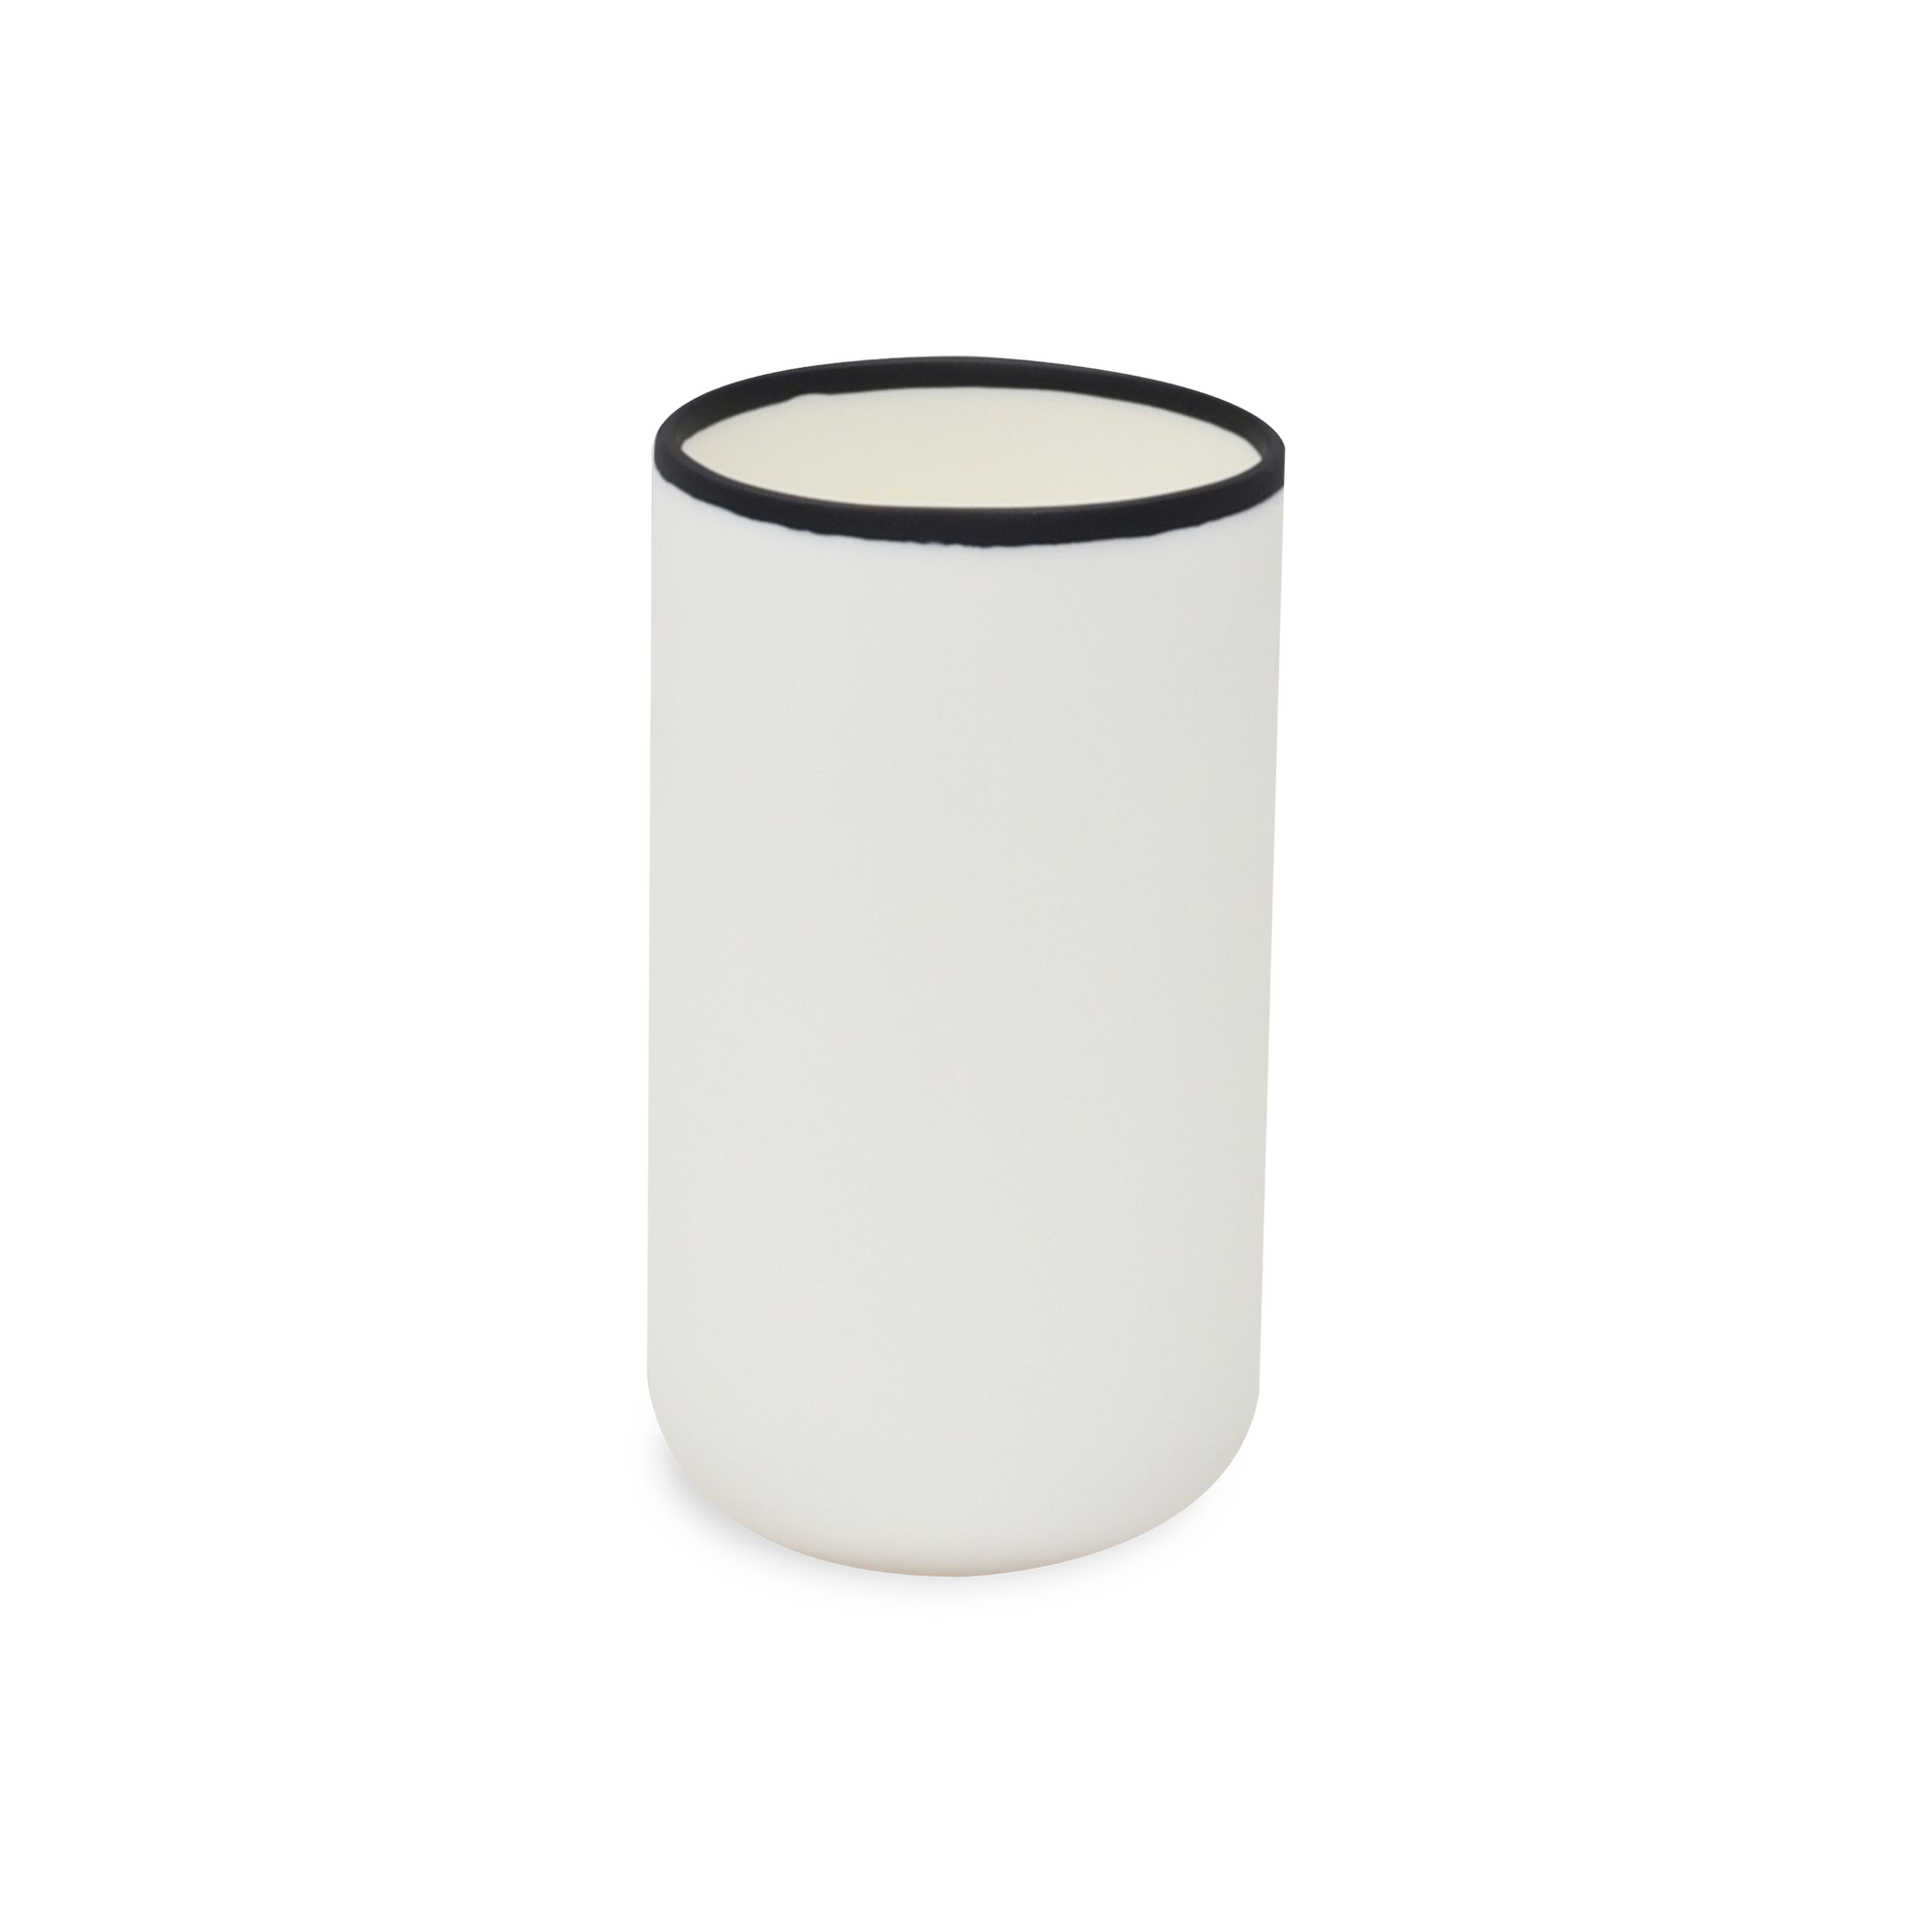 The decorative Rim Vase in white with a contrasting black rim is handmade, hand-cast and hand finished with care resulting in unique variations in each item.